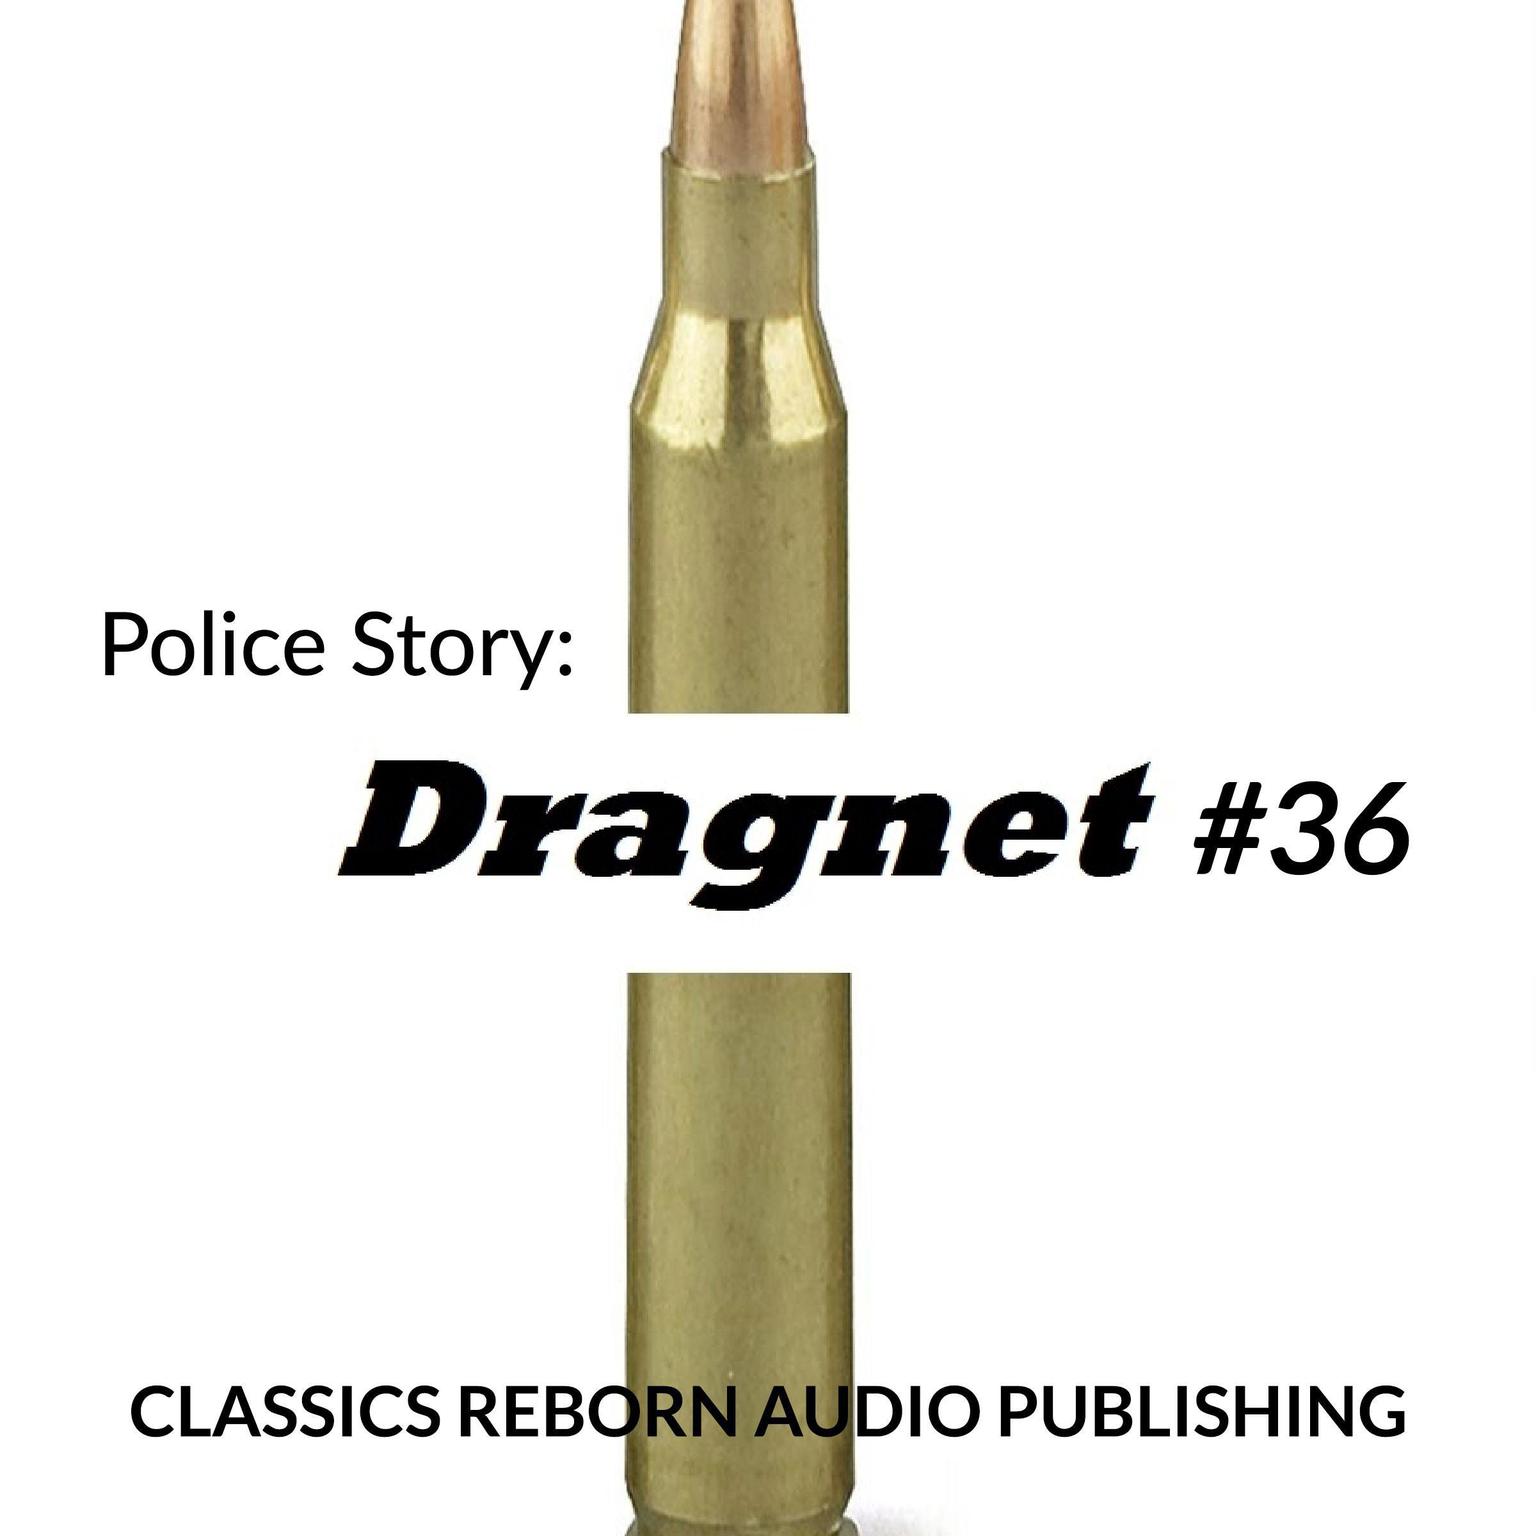 Police Story: Dragnet #36 Audiobook, by Classics Reborn Audio Publishing